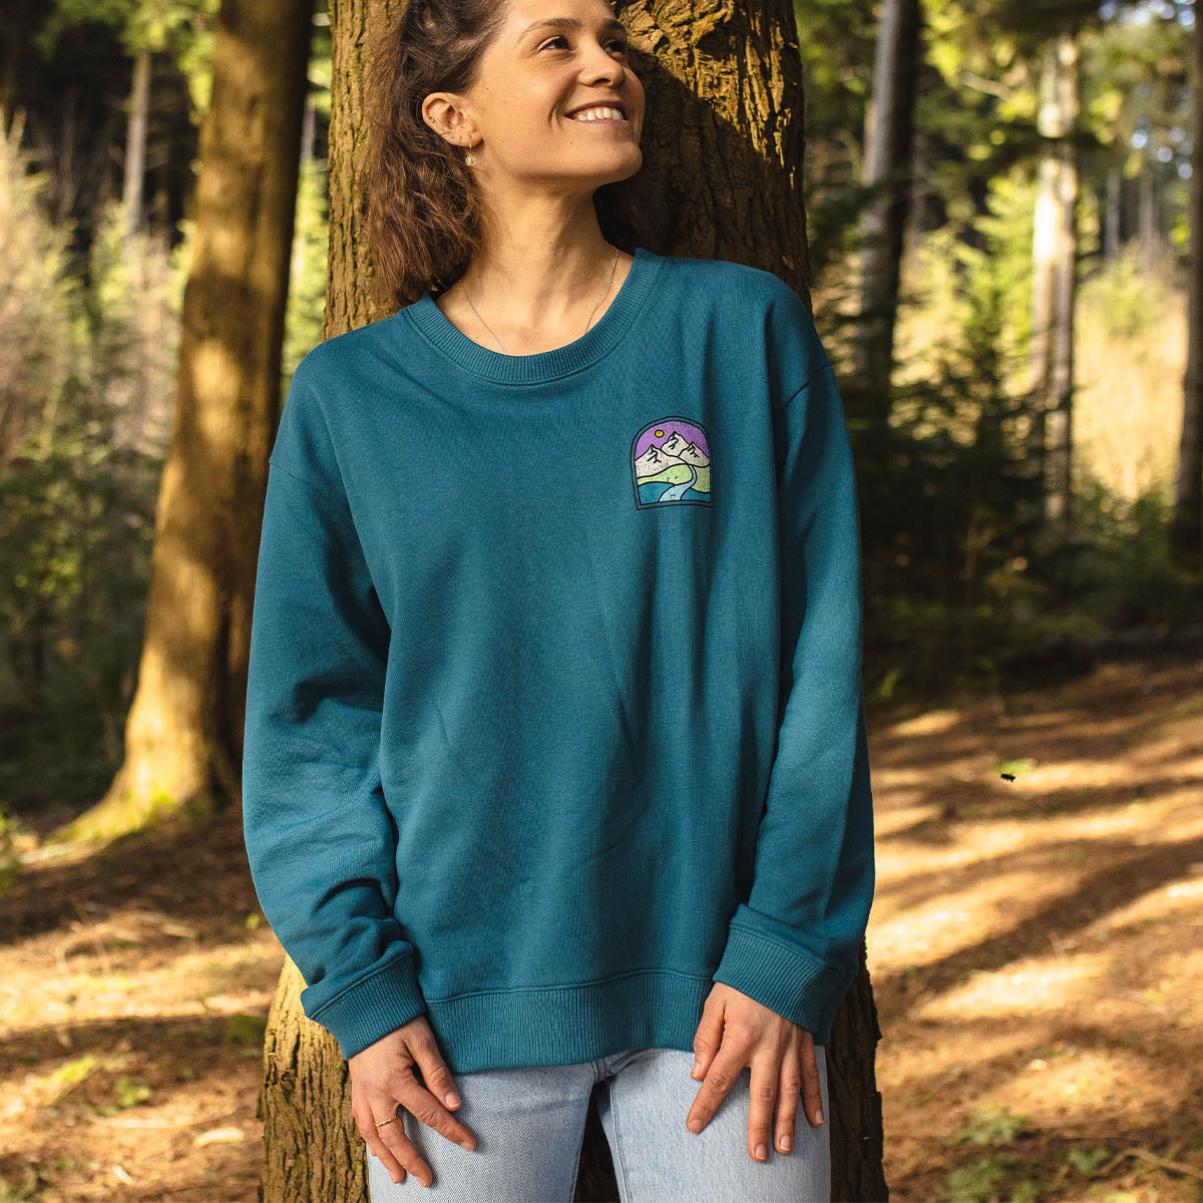 Friday Collective Recycled Cotton Oversized Sweatshirt Hoodies & Sweatshirts Women Voucher Blue Coral Passenger Clothing - 4